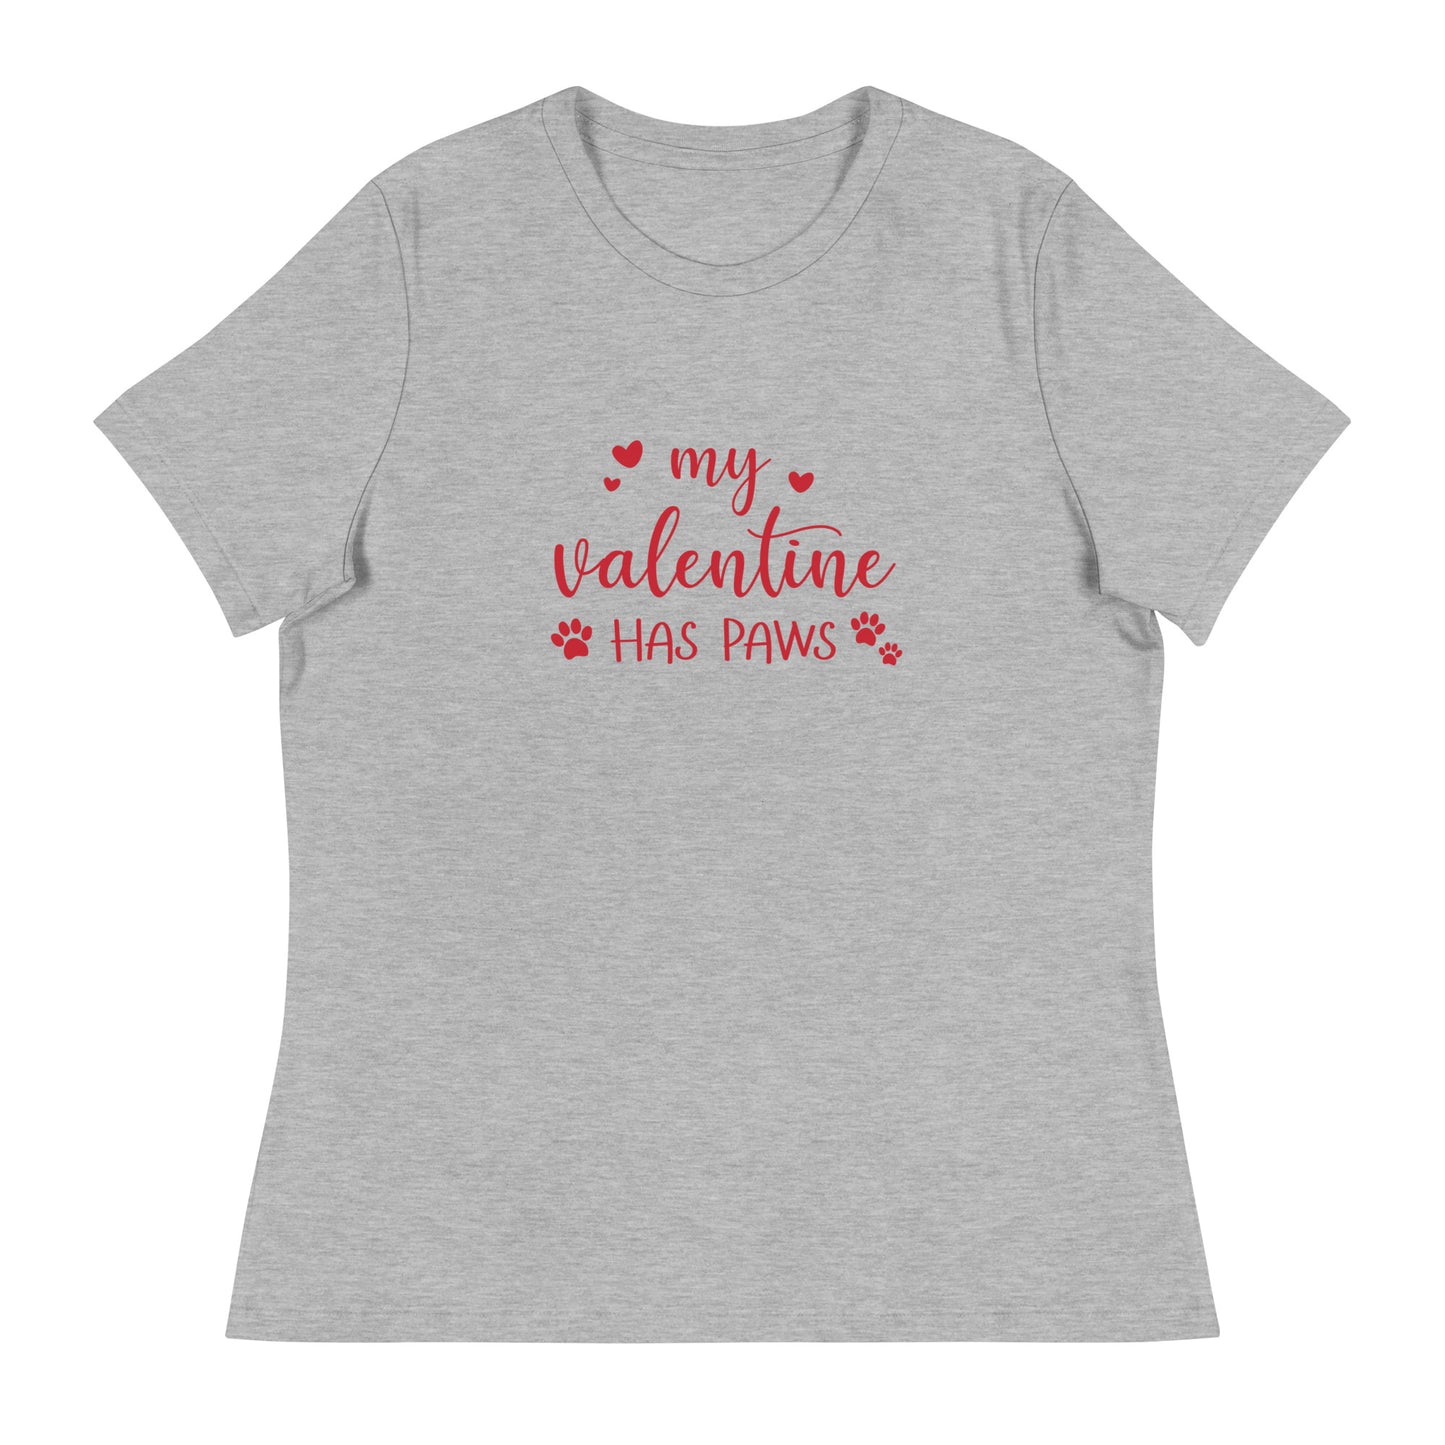 My Valentine Has Paws Women's Relaxed T-Shirt